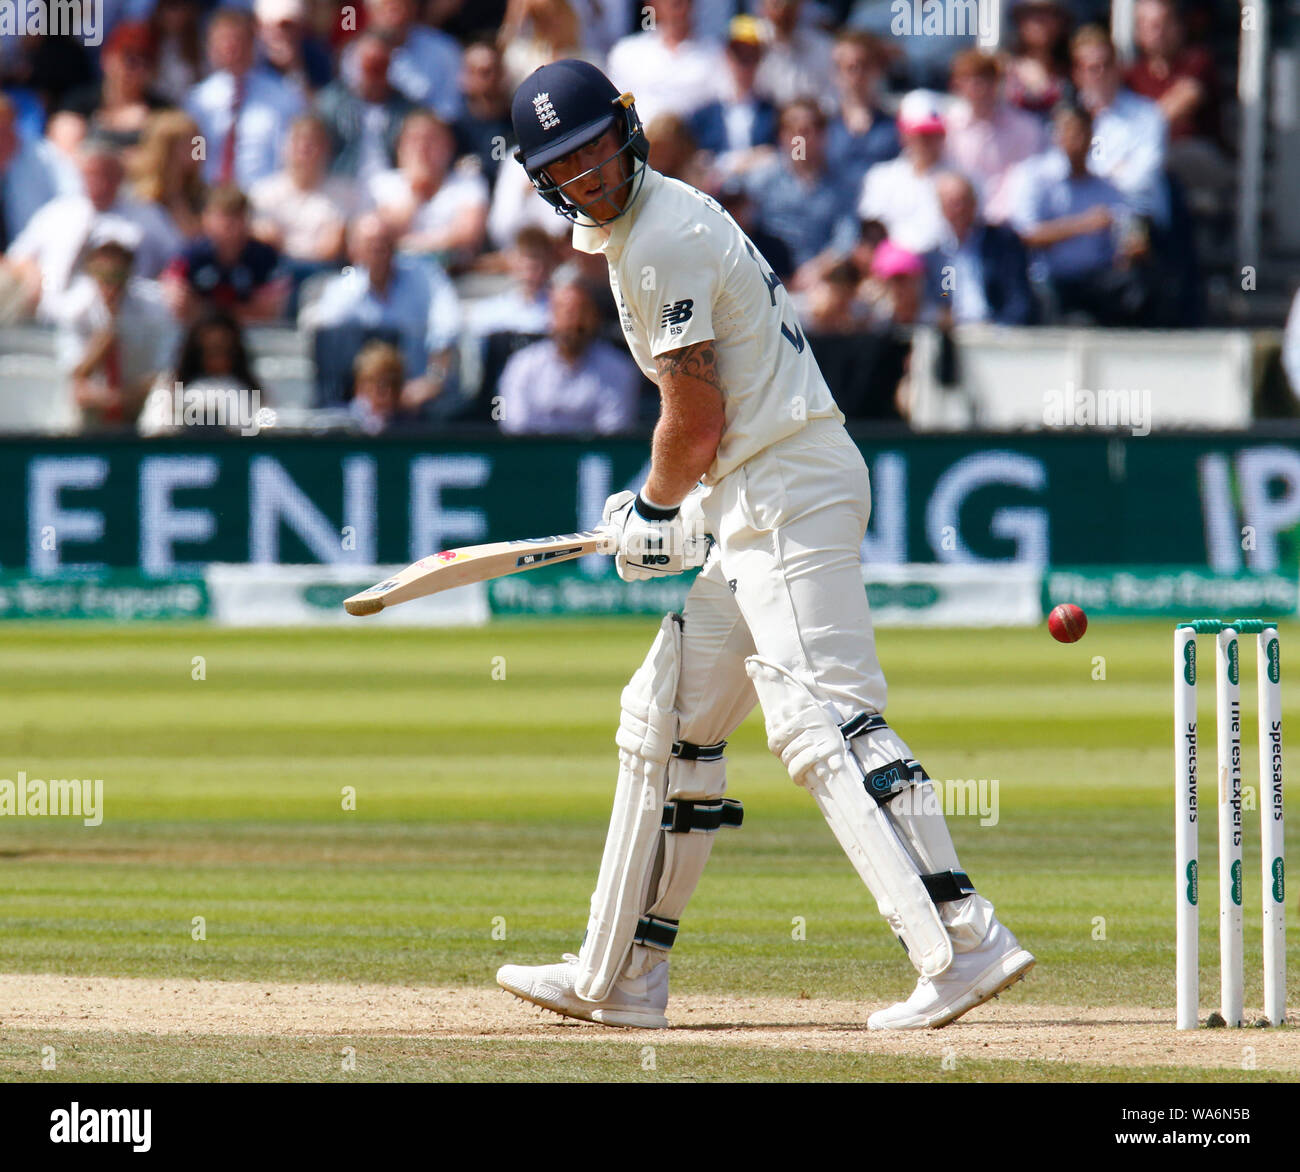 London, UK. 18 August 2019.  Ben Stokes of England during play on the 5th day of the second Ashes cricket Test match between England and Australia at Lord's Cricket ground in London, England on August 18, 2019  Credit: Action Foto Sport/Alamy Live News Stock Photo